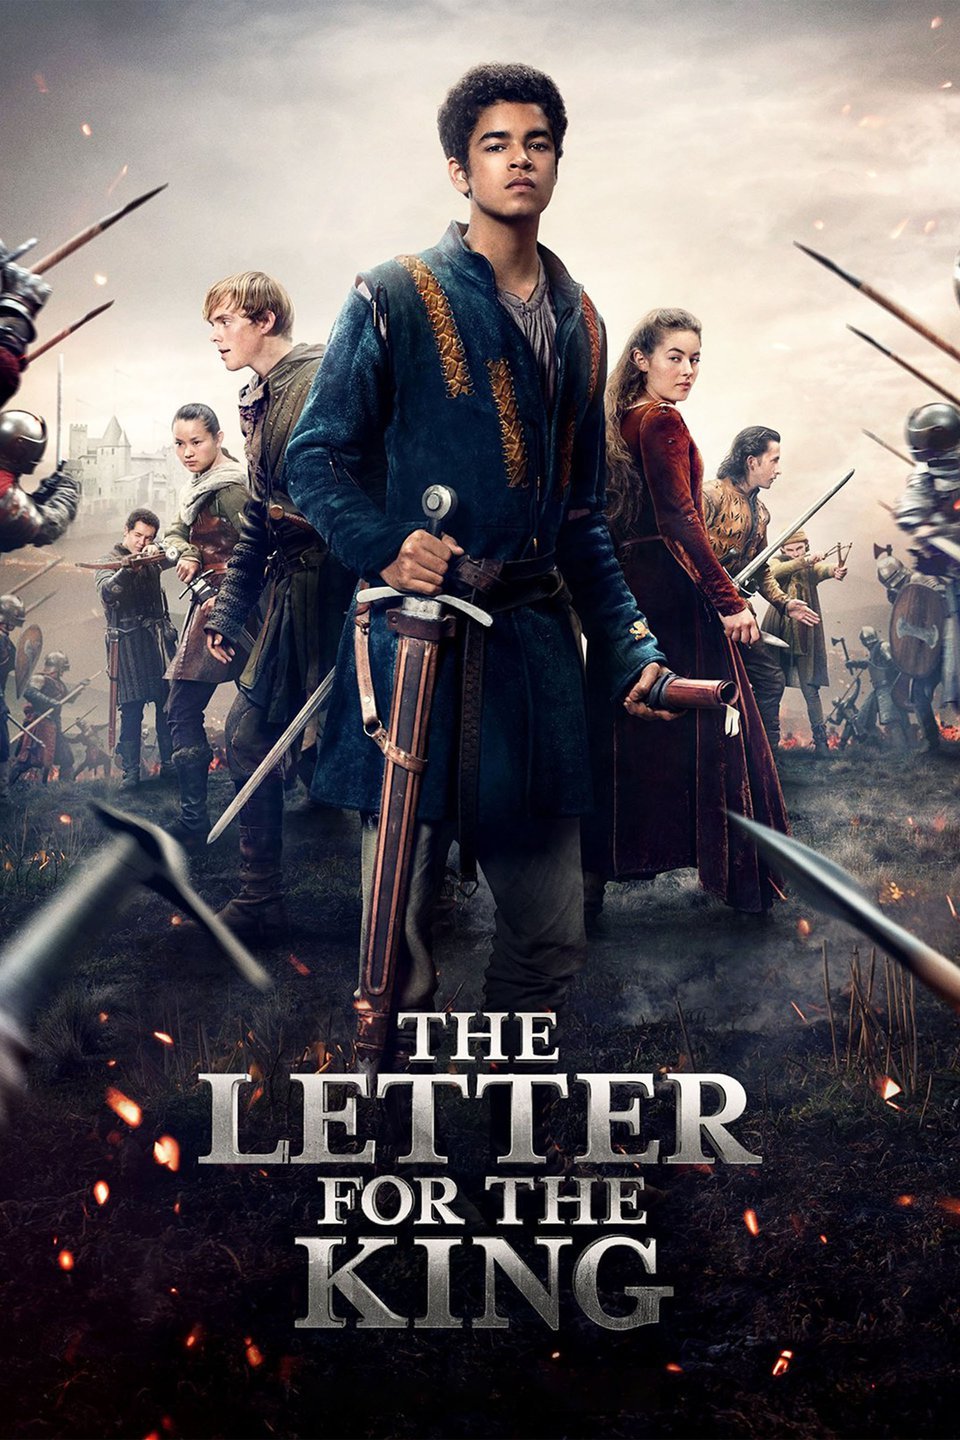 the letter for the king netflix episode 1 review